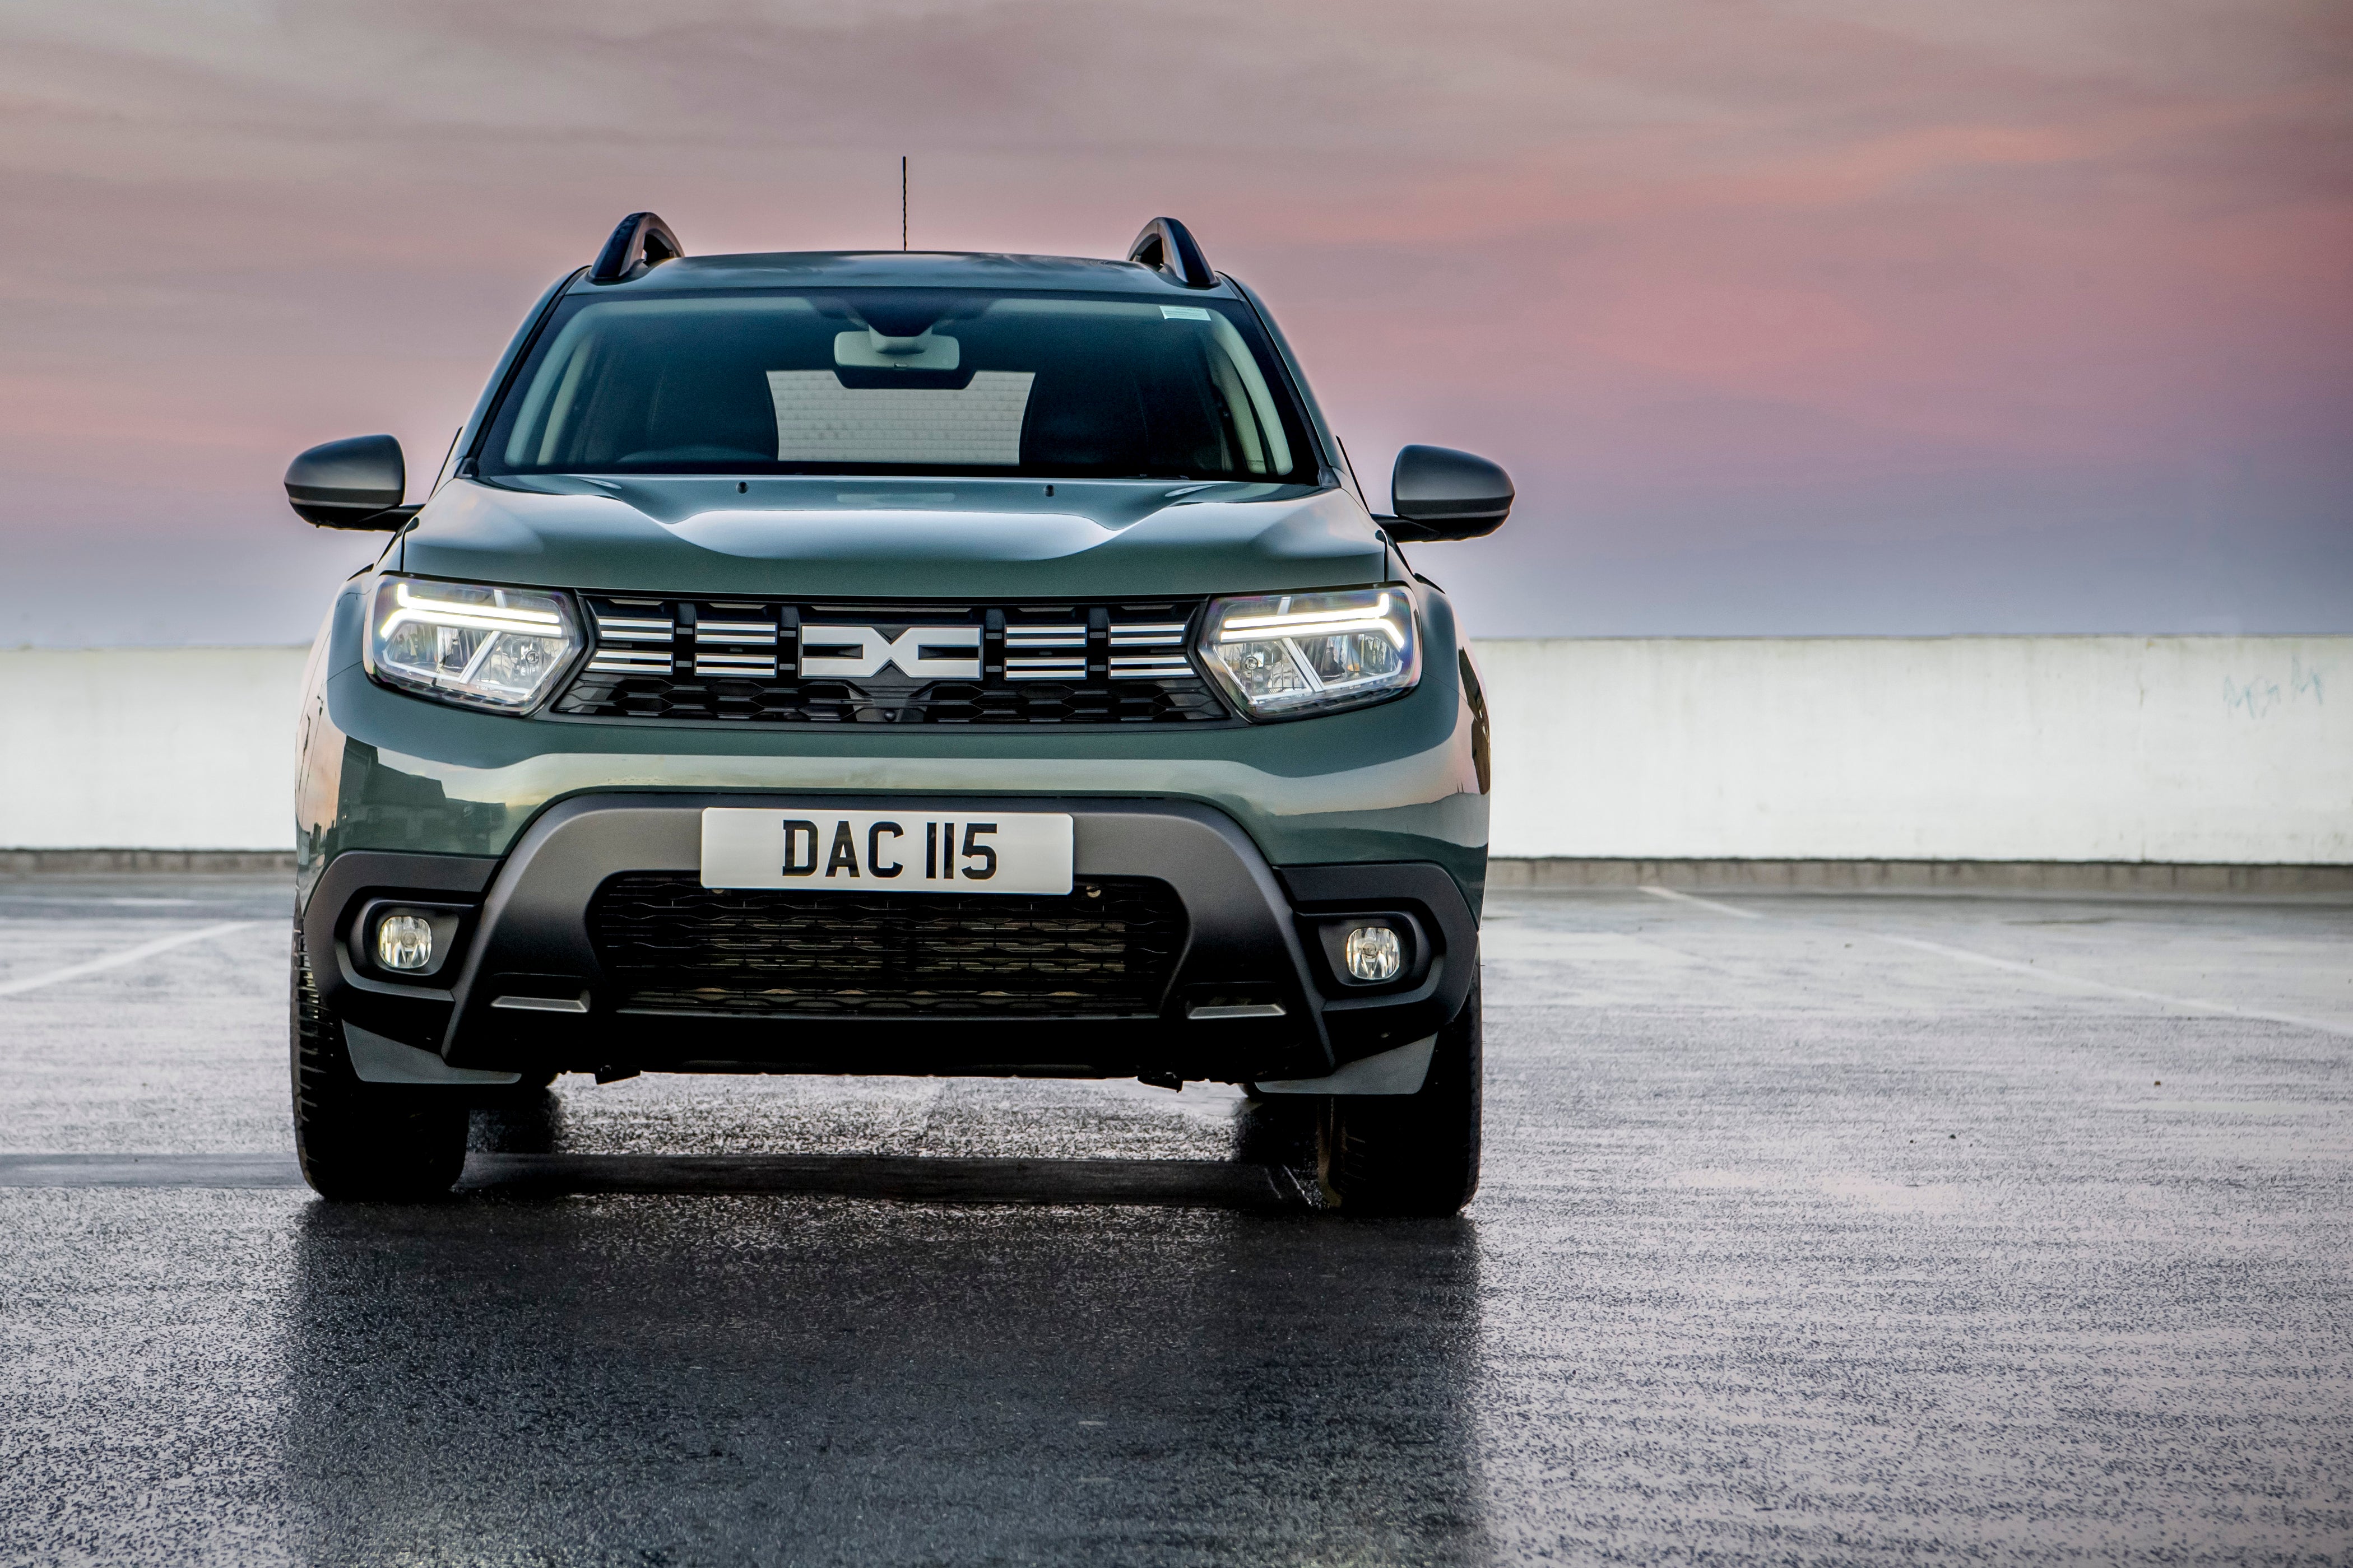 Dacia Duster 4x4 review: back-to-basics SUV is a great, utilitarian  workhorse